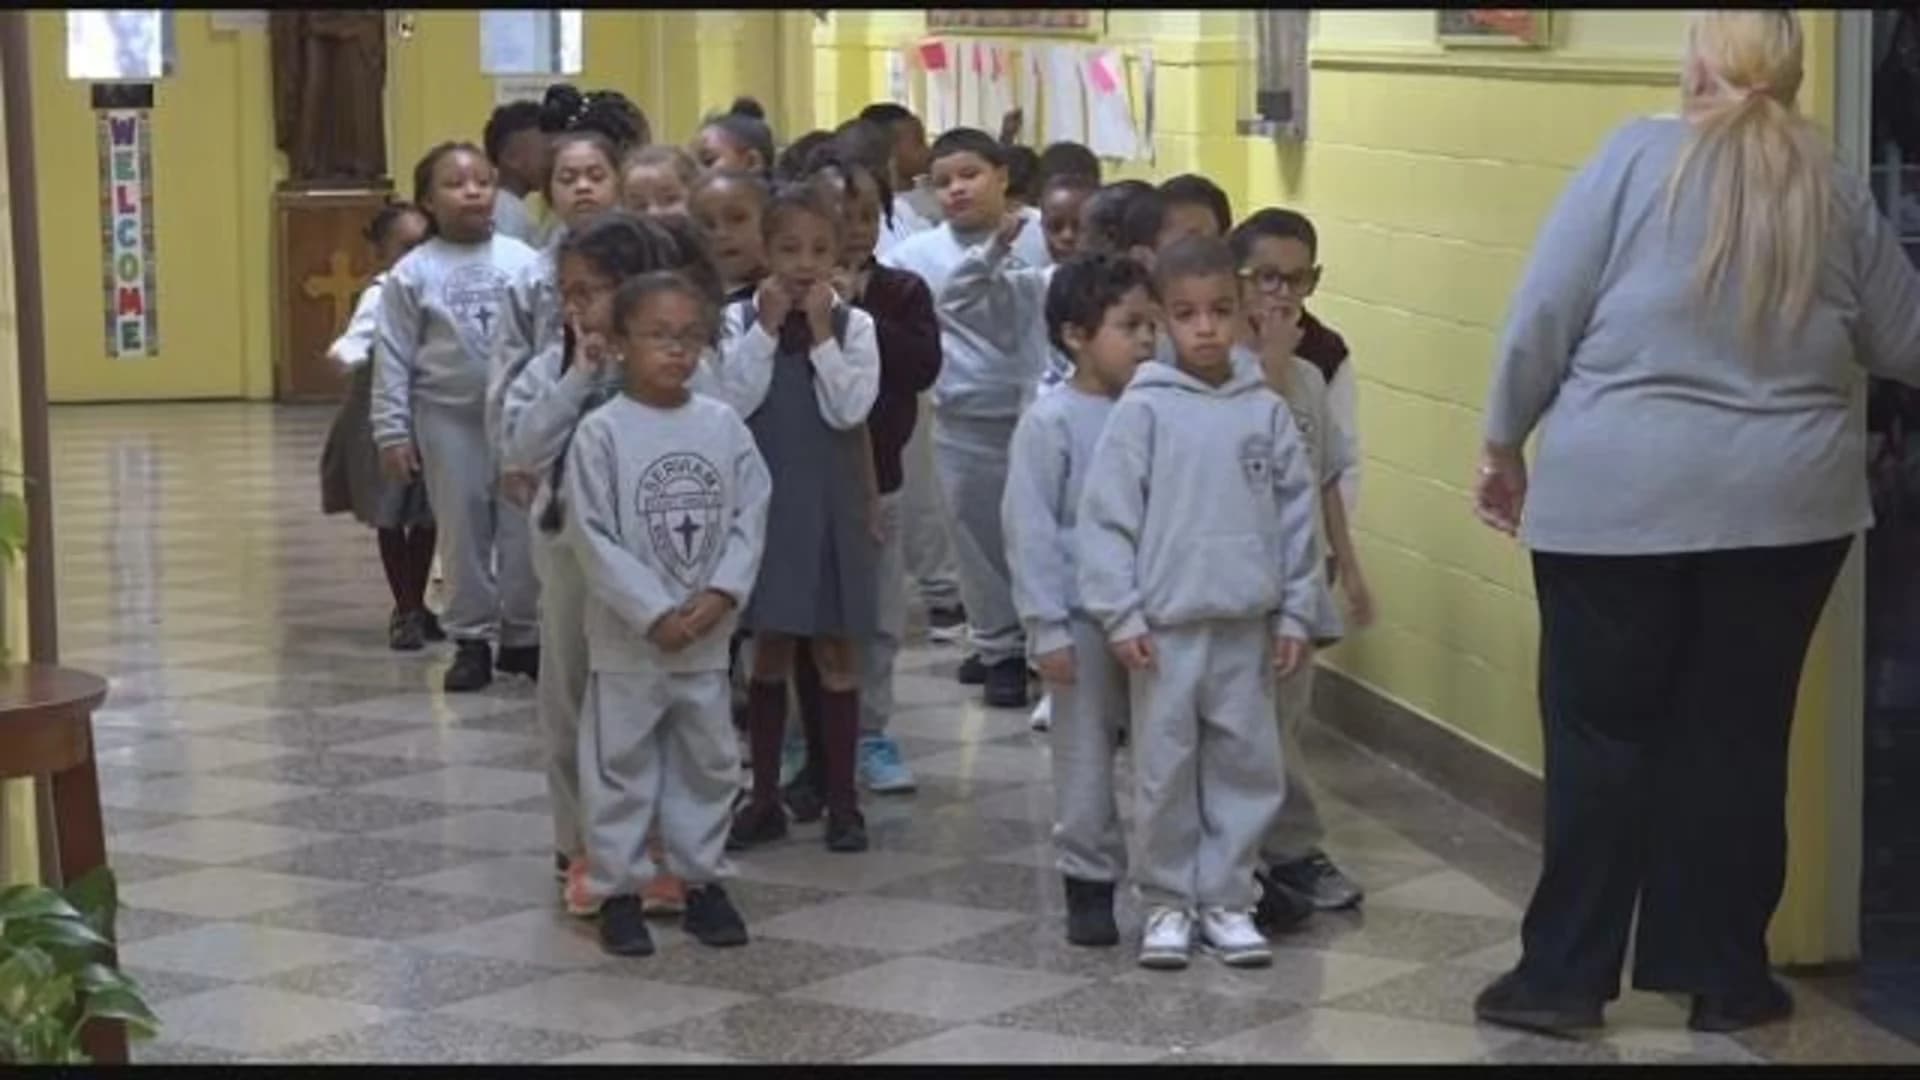 State data shows Catholic schools’ performance on the rise in the Bronx